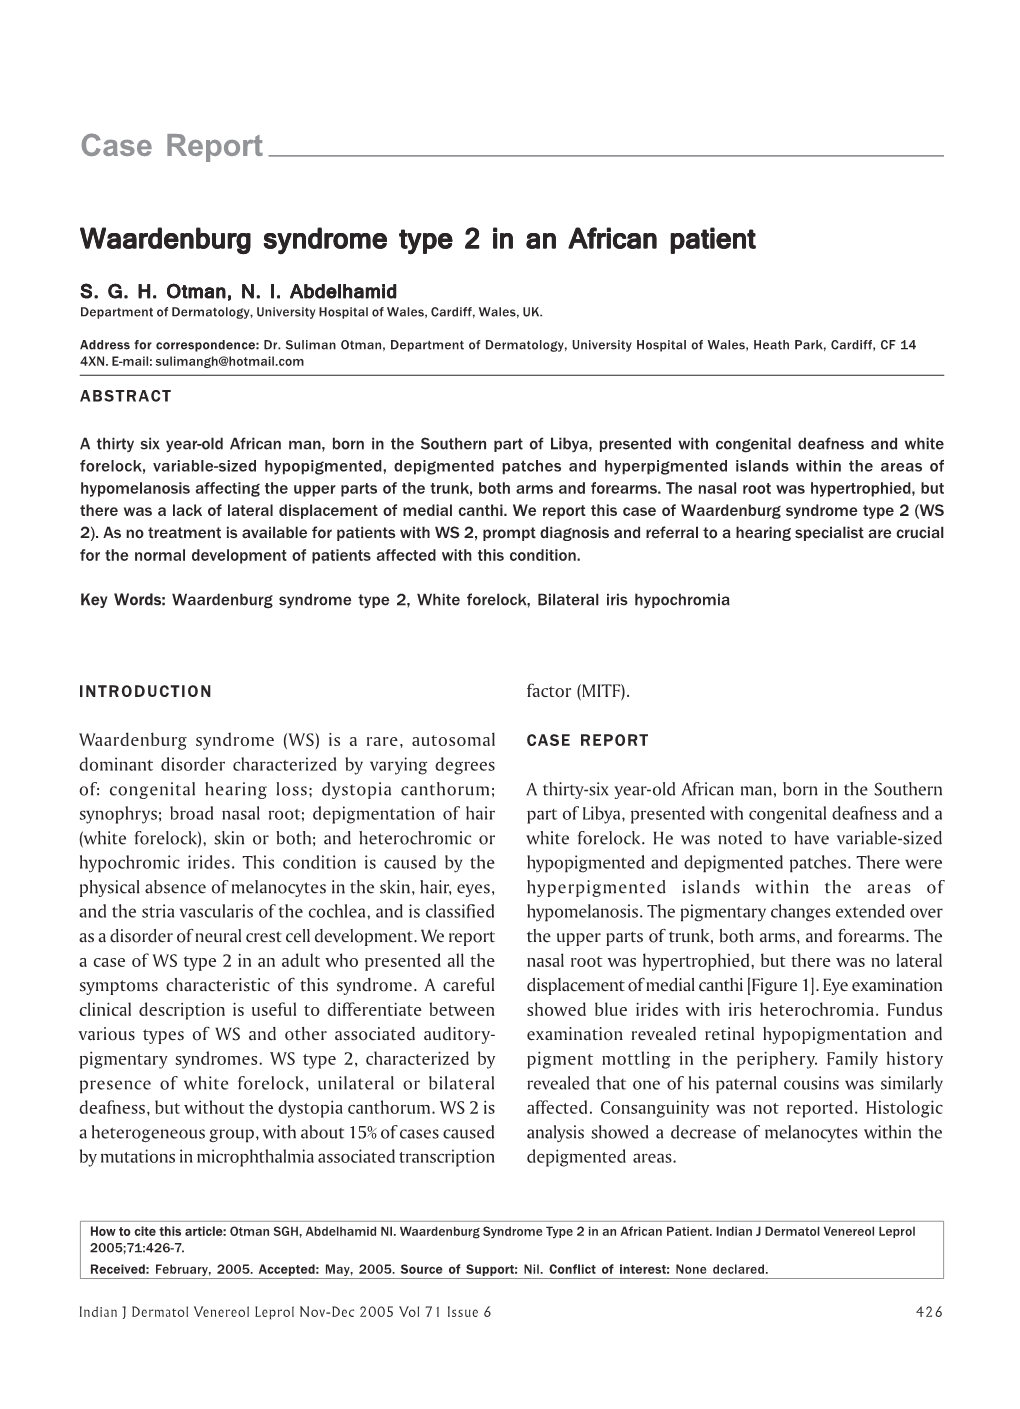 Waardenburg Syndrome Type 2 in an African Patient